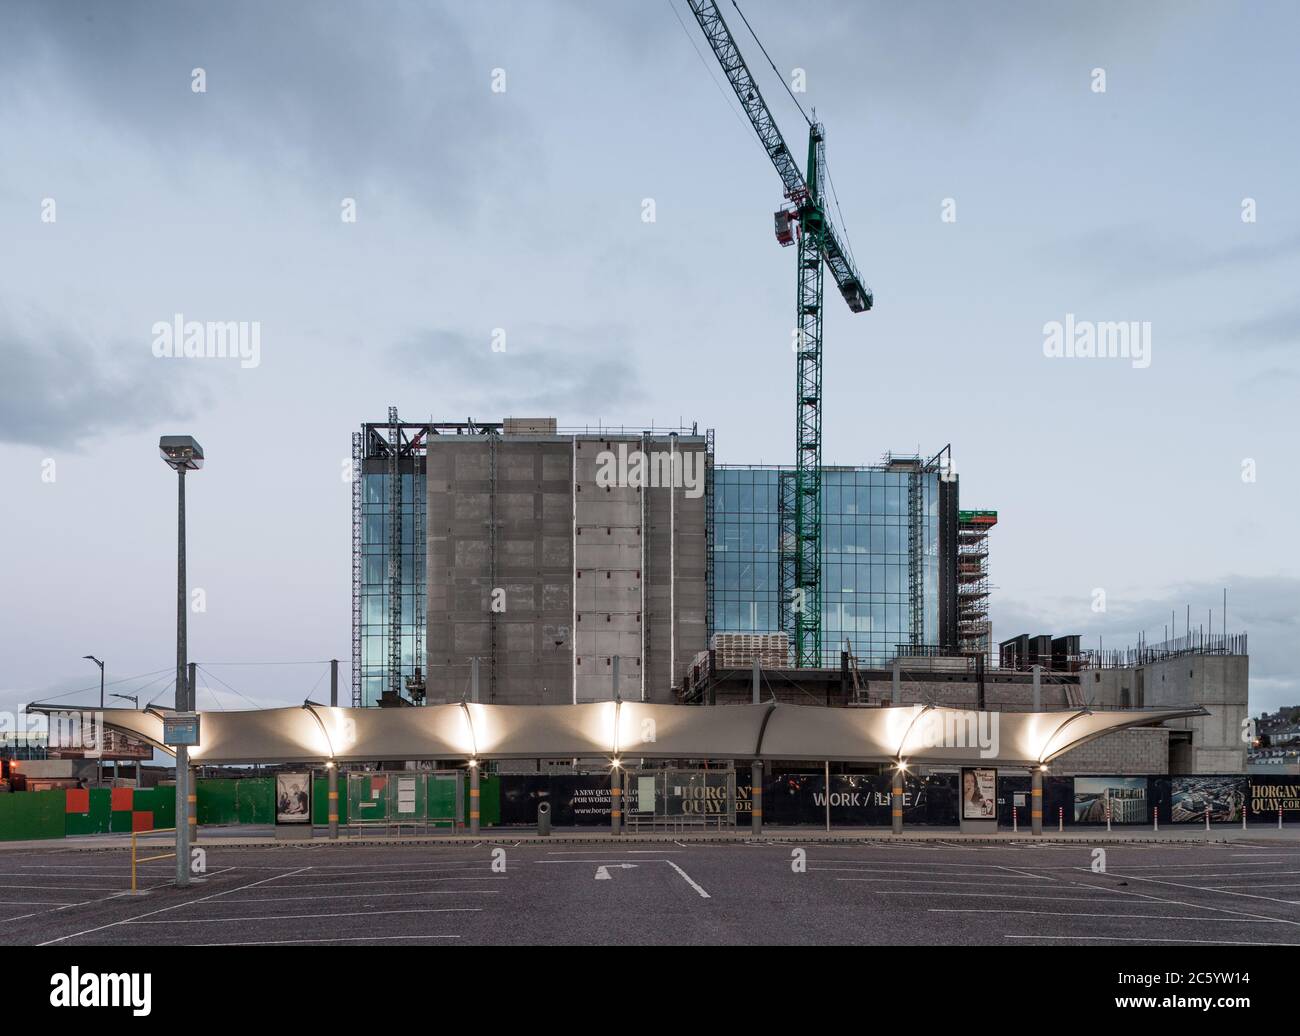 Cork City, Cork, Ireland. 06th July, 2020. A view of a section of the new Horgan's Quay development which is still under construction from the car park of Kent Station in Cork City, Cork, Ireland. - Credit; David Creedon / Alamy Live News Stock Photo